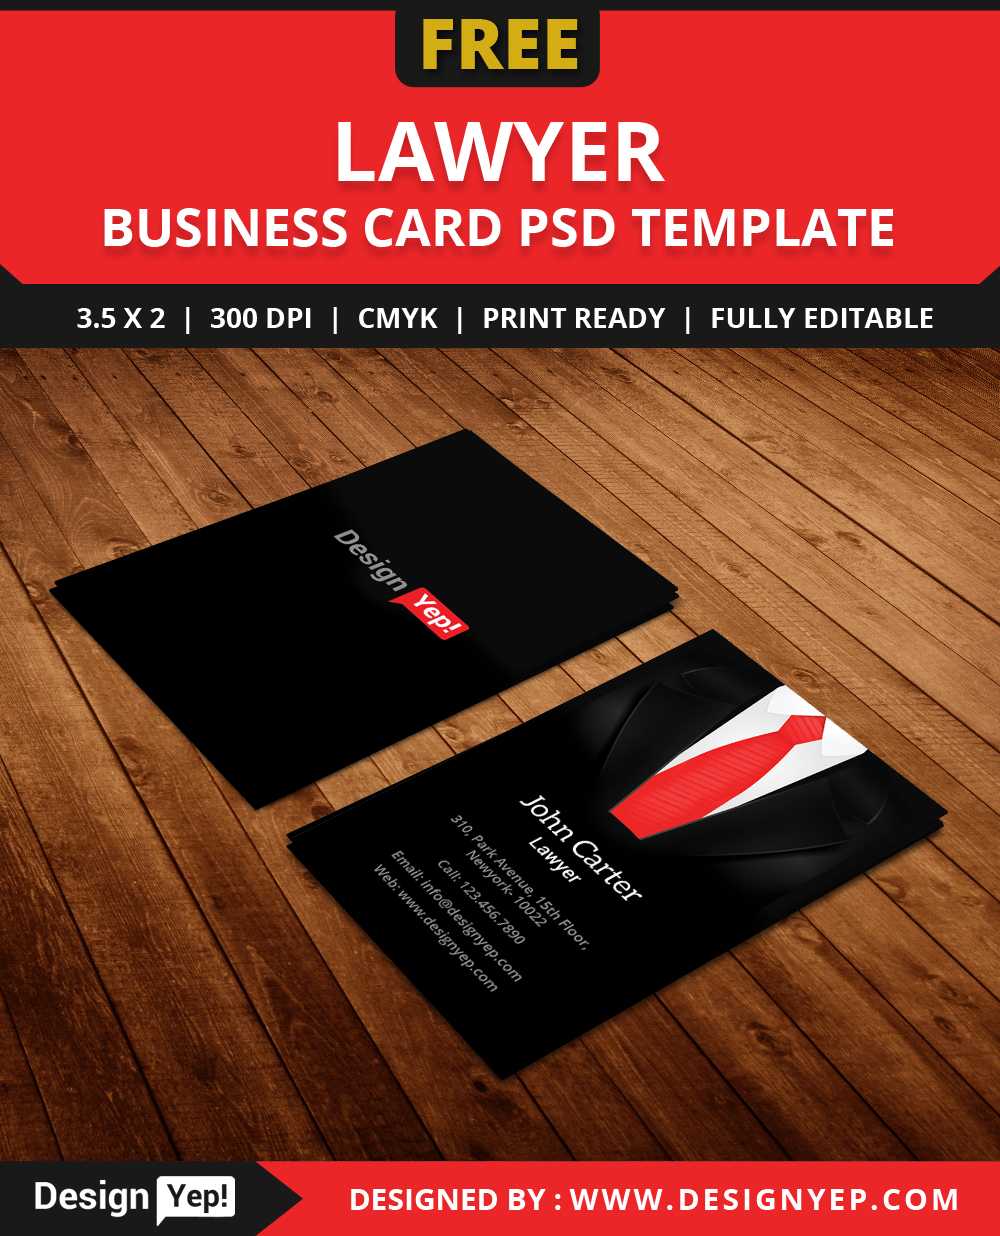 Free Lawyer Business Card Template Psd – Designyep In Legal Business Cards Templates Free